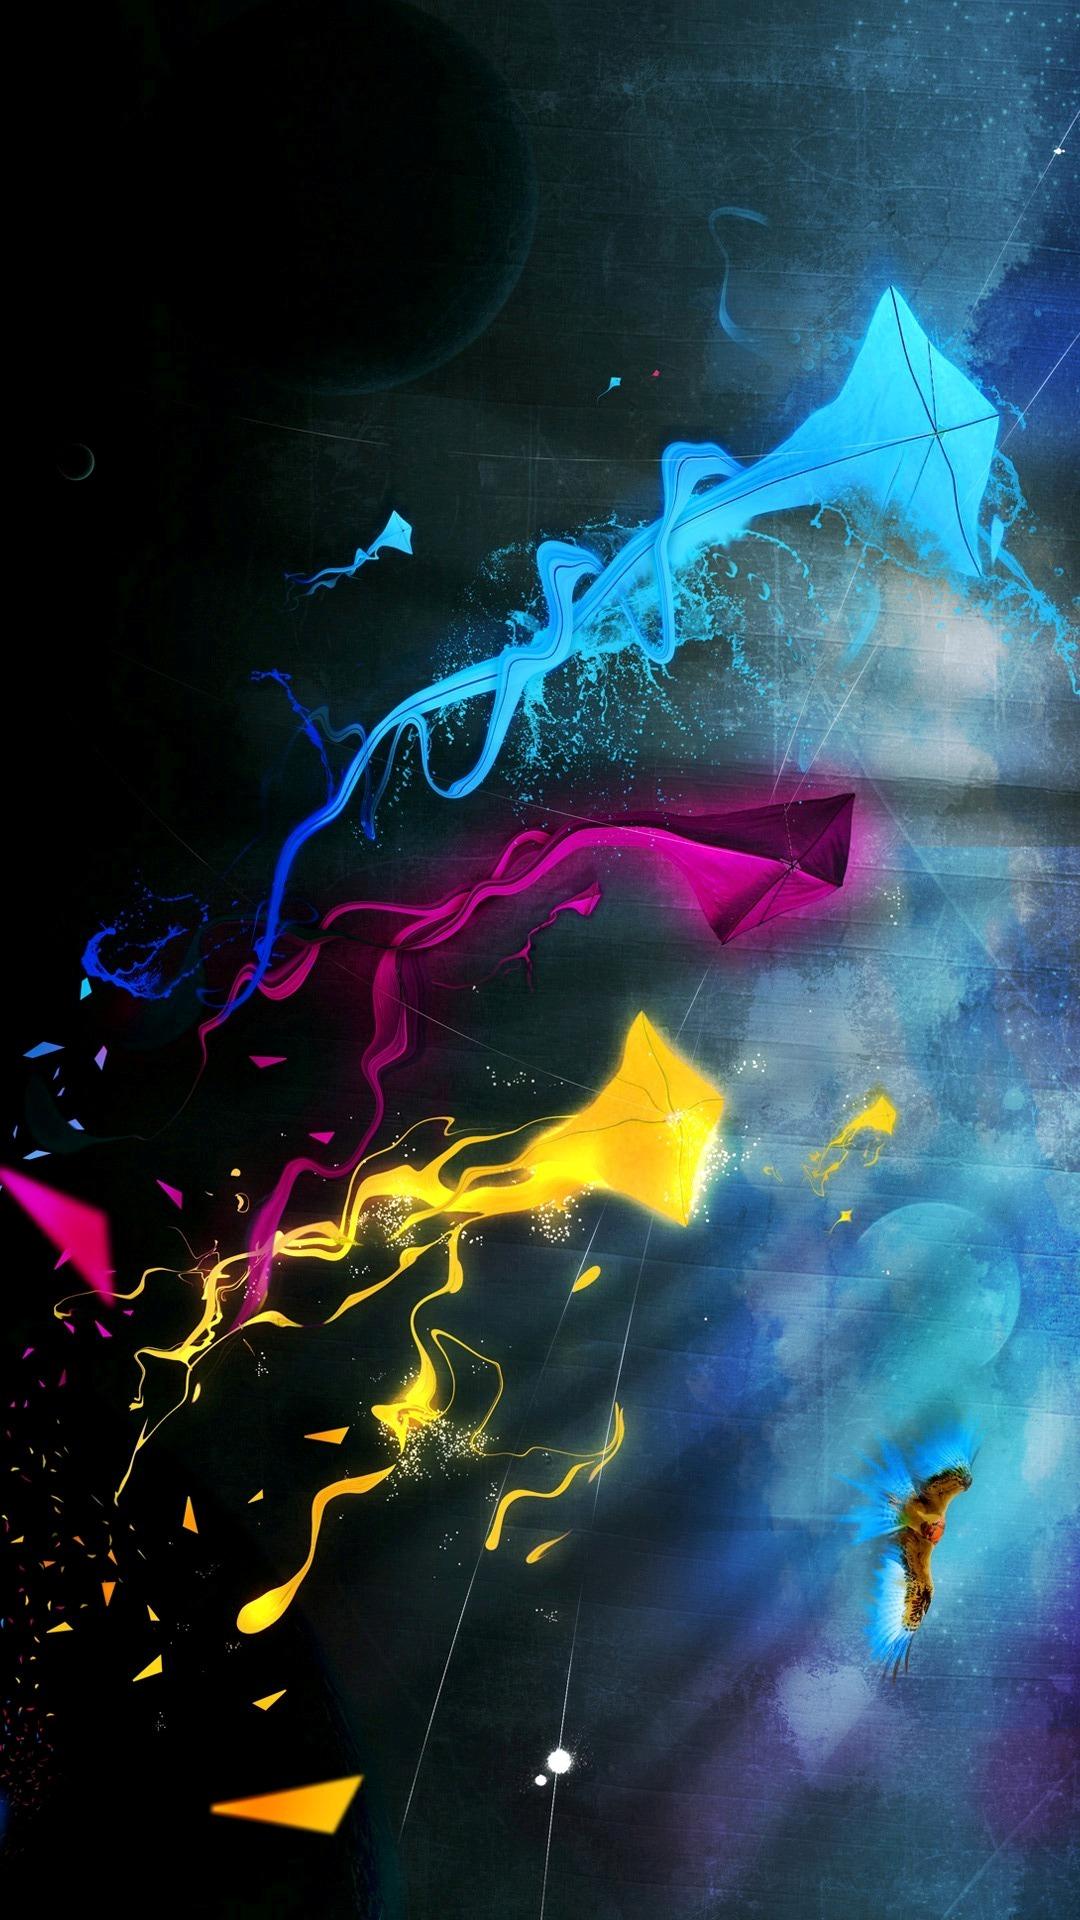 47+] HD Wallpapers for Mobile Phones